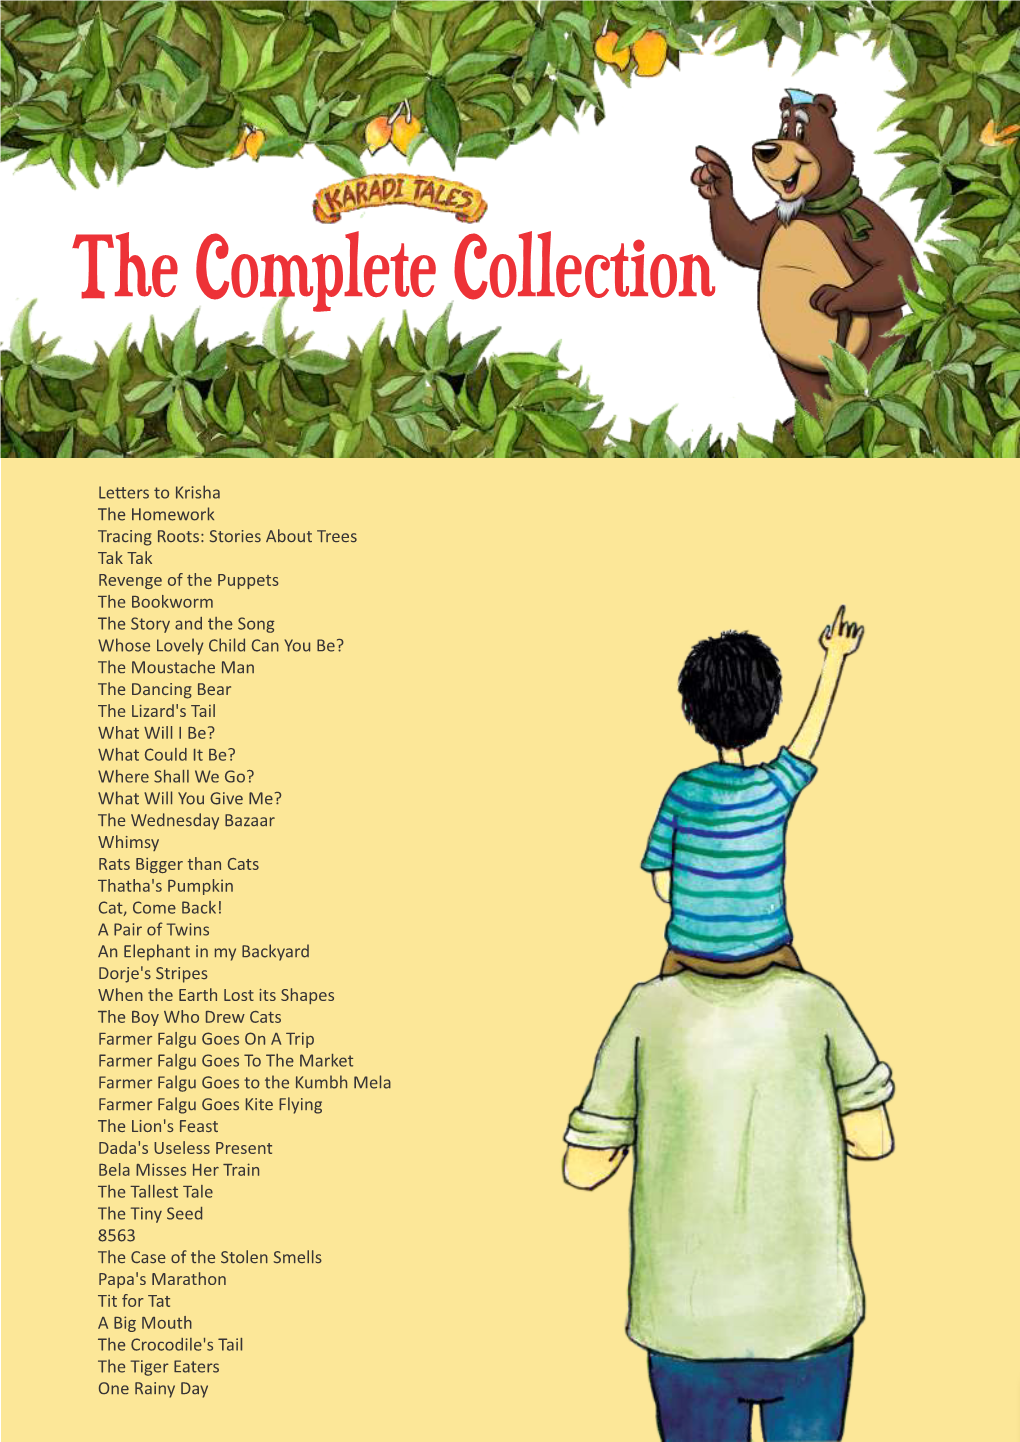 The Complete Collection Feb21.Cdr